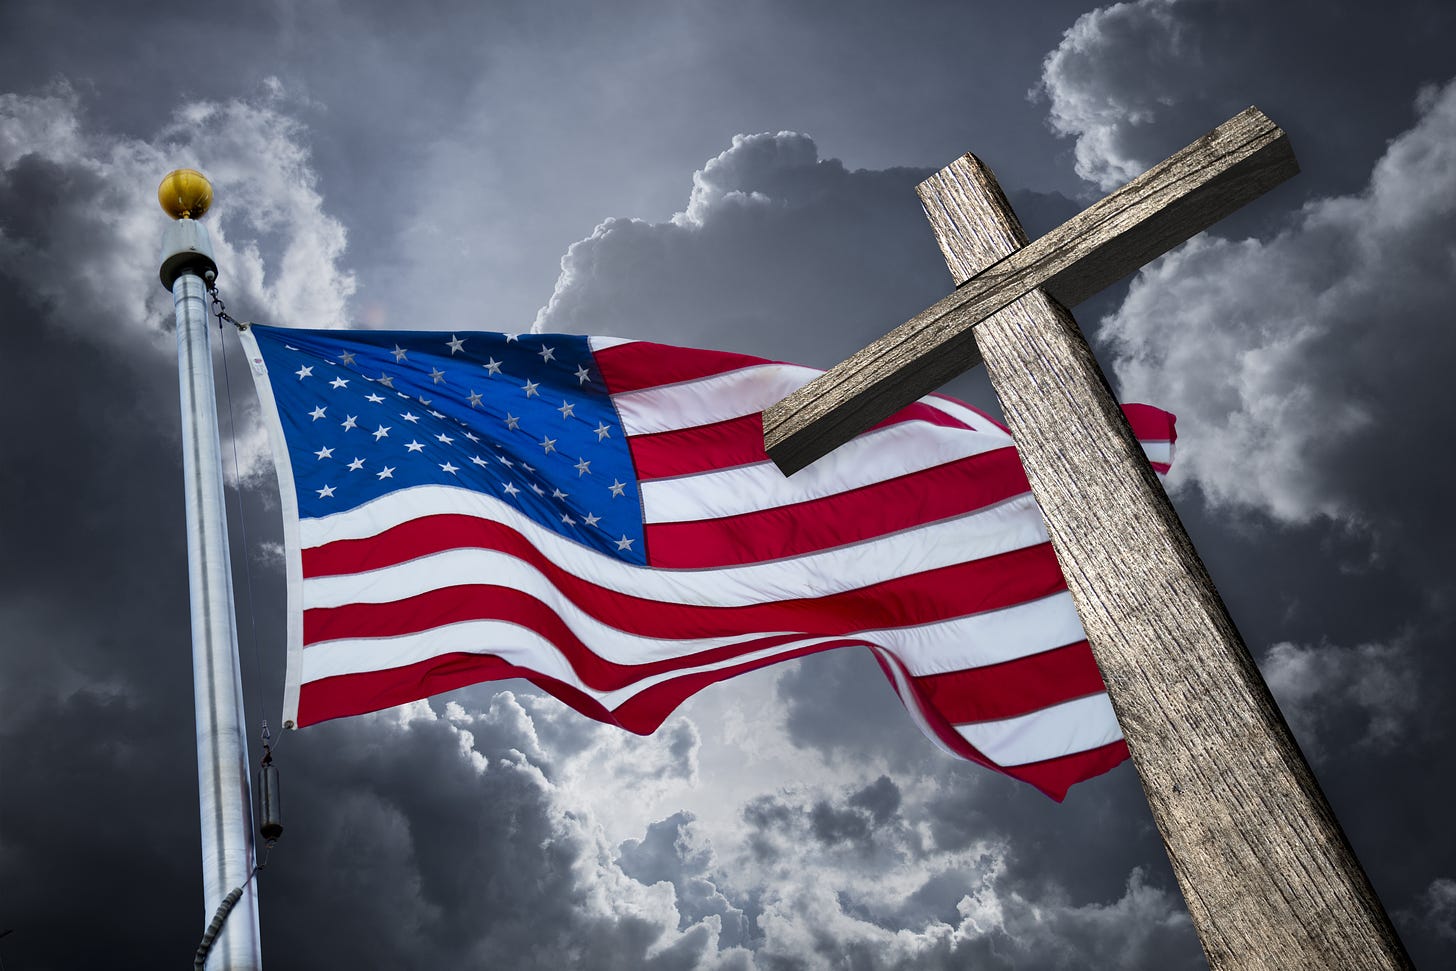 a Christian cross in front of an American flag against a dark sky